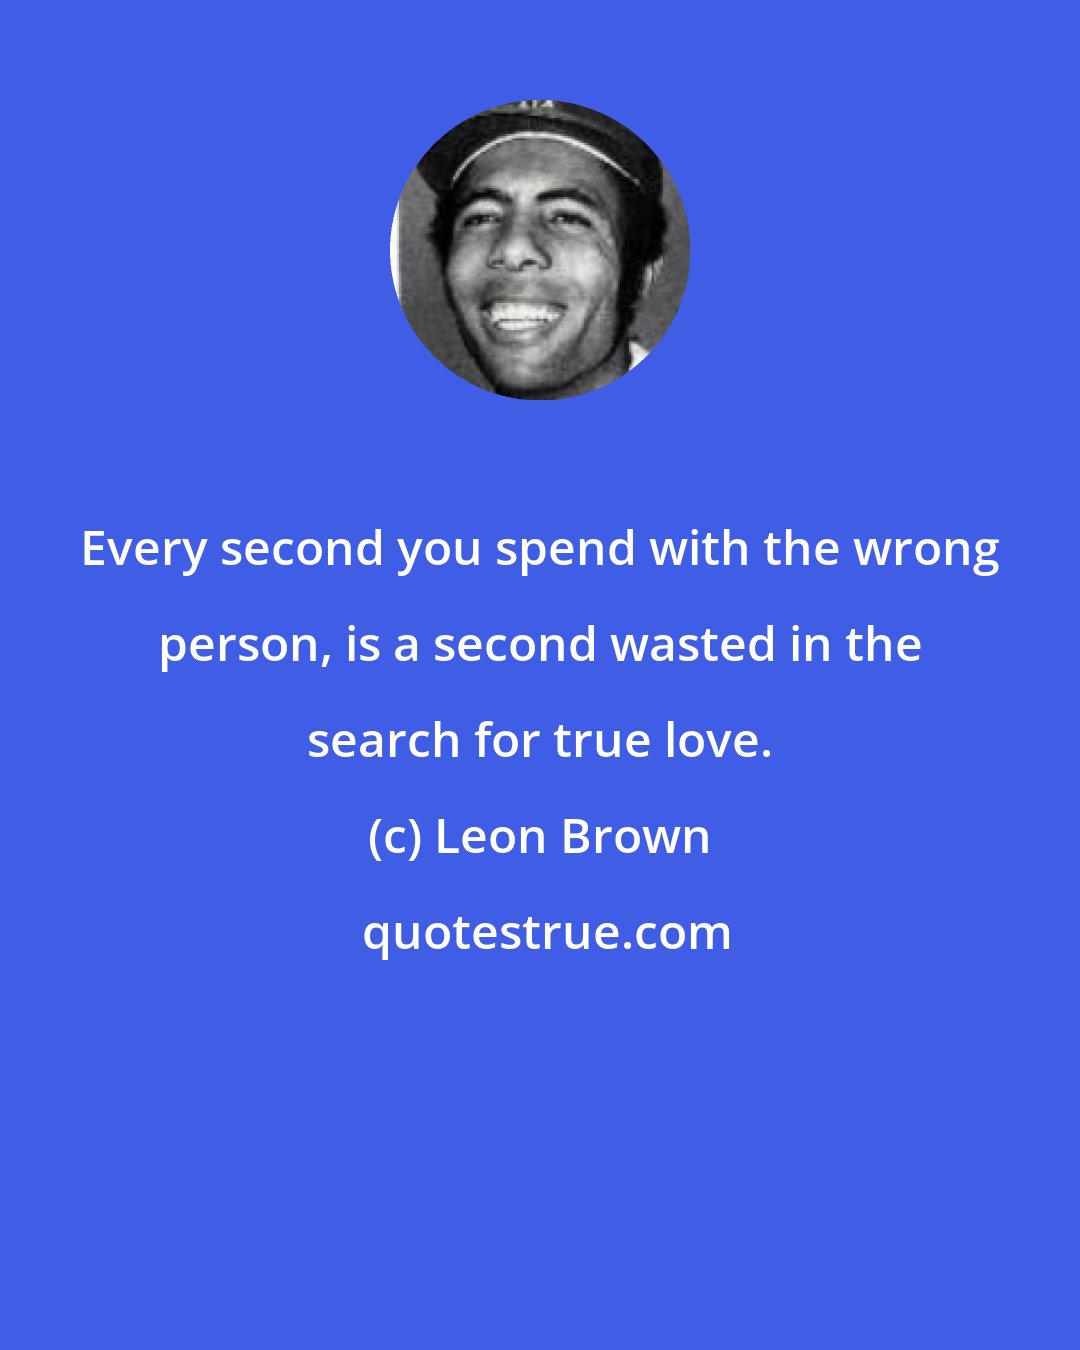 Leon Brown: Every second you spend with the wrong person, is a second wasted in the search for true love.